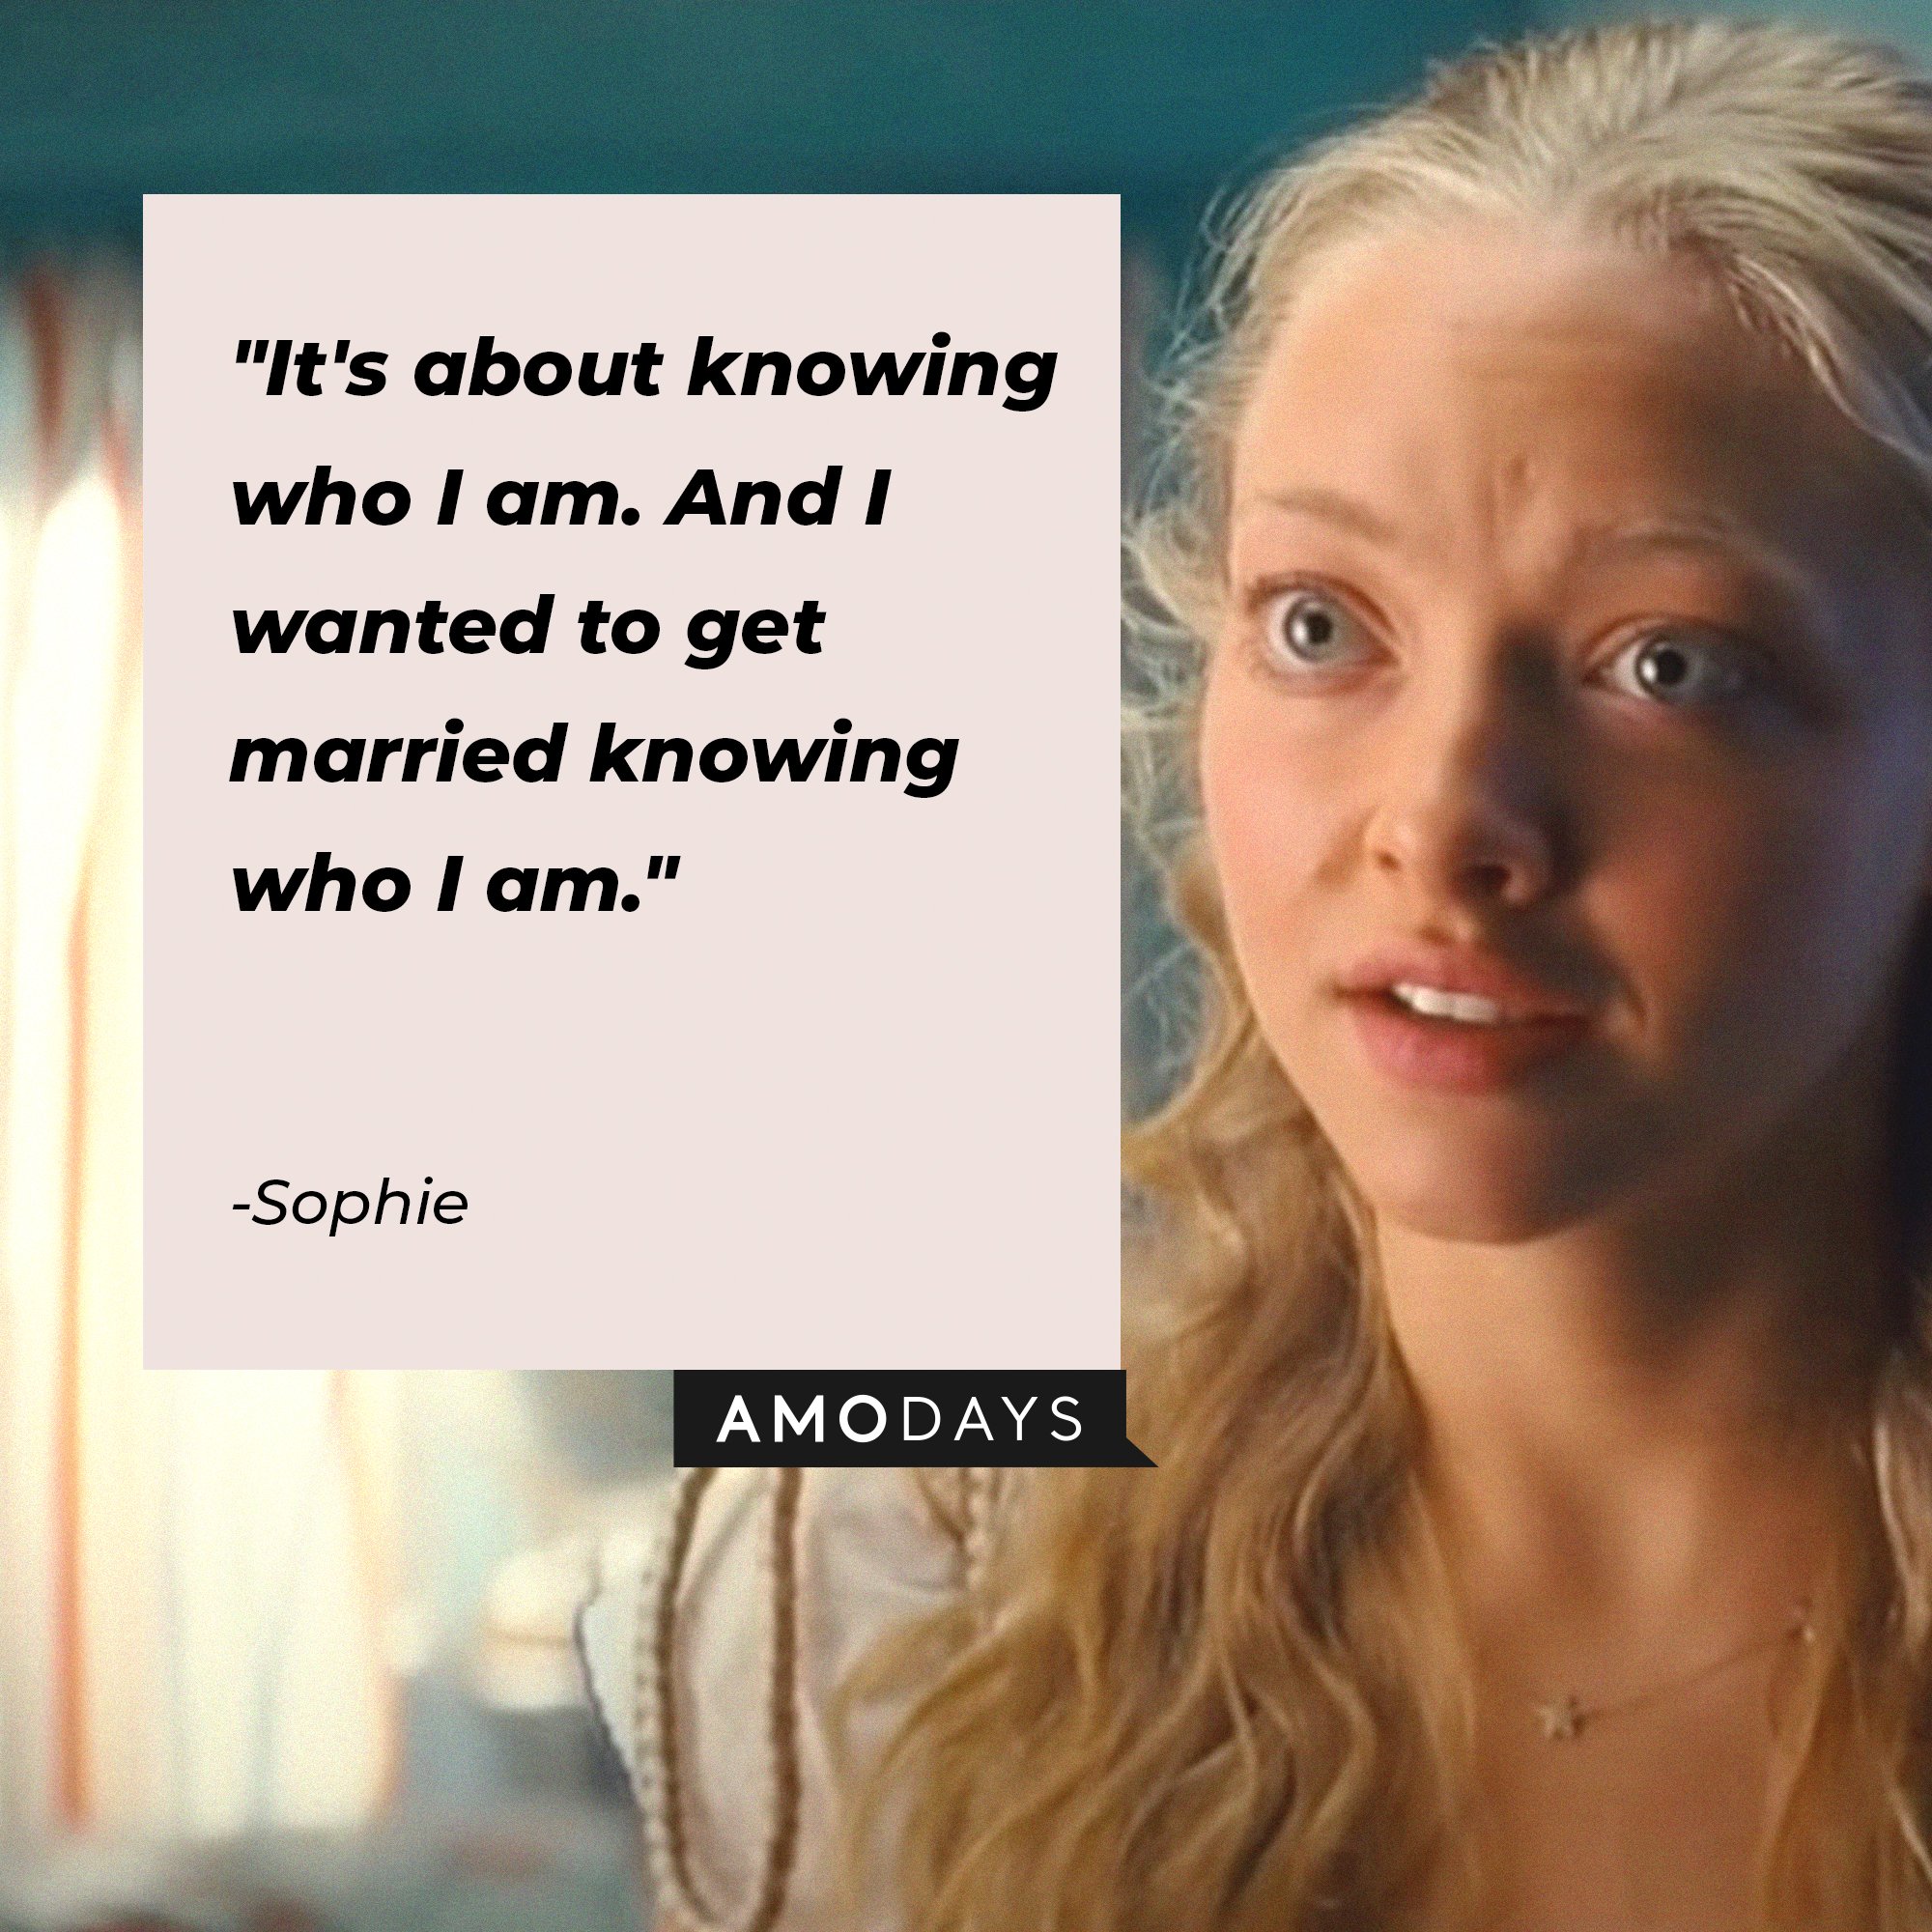 Sophie's quote: "It's about knowing who I am. And I wanted to get married knowing who I am." | Image: AmoDays